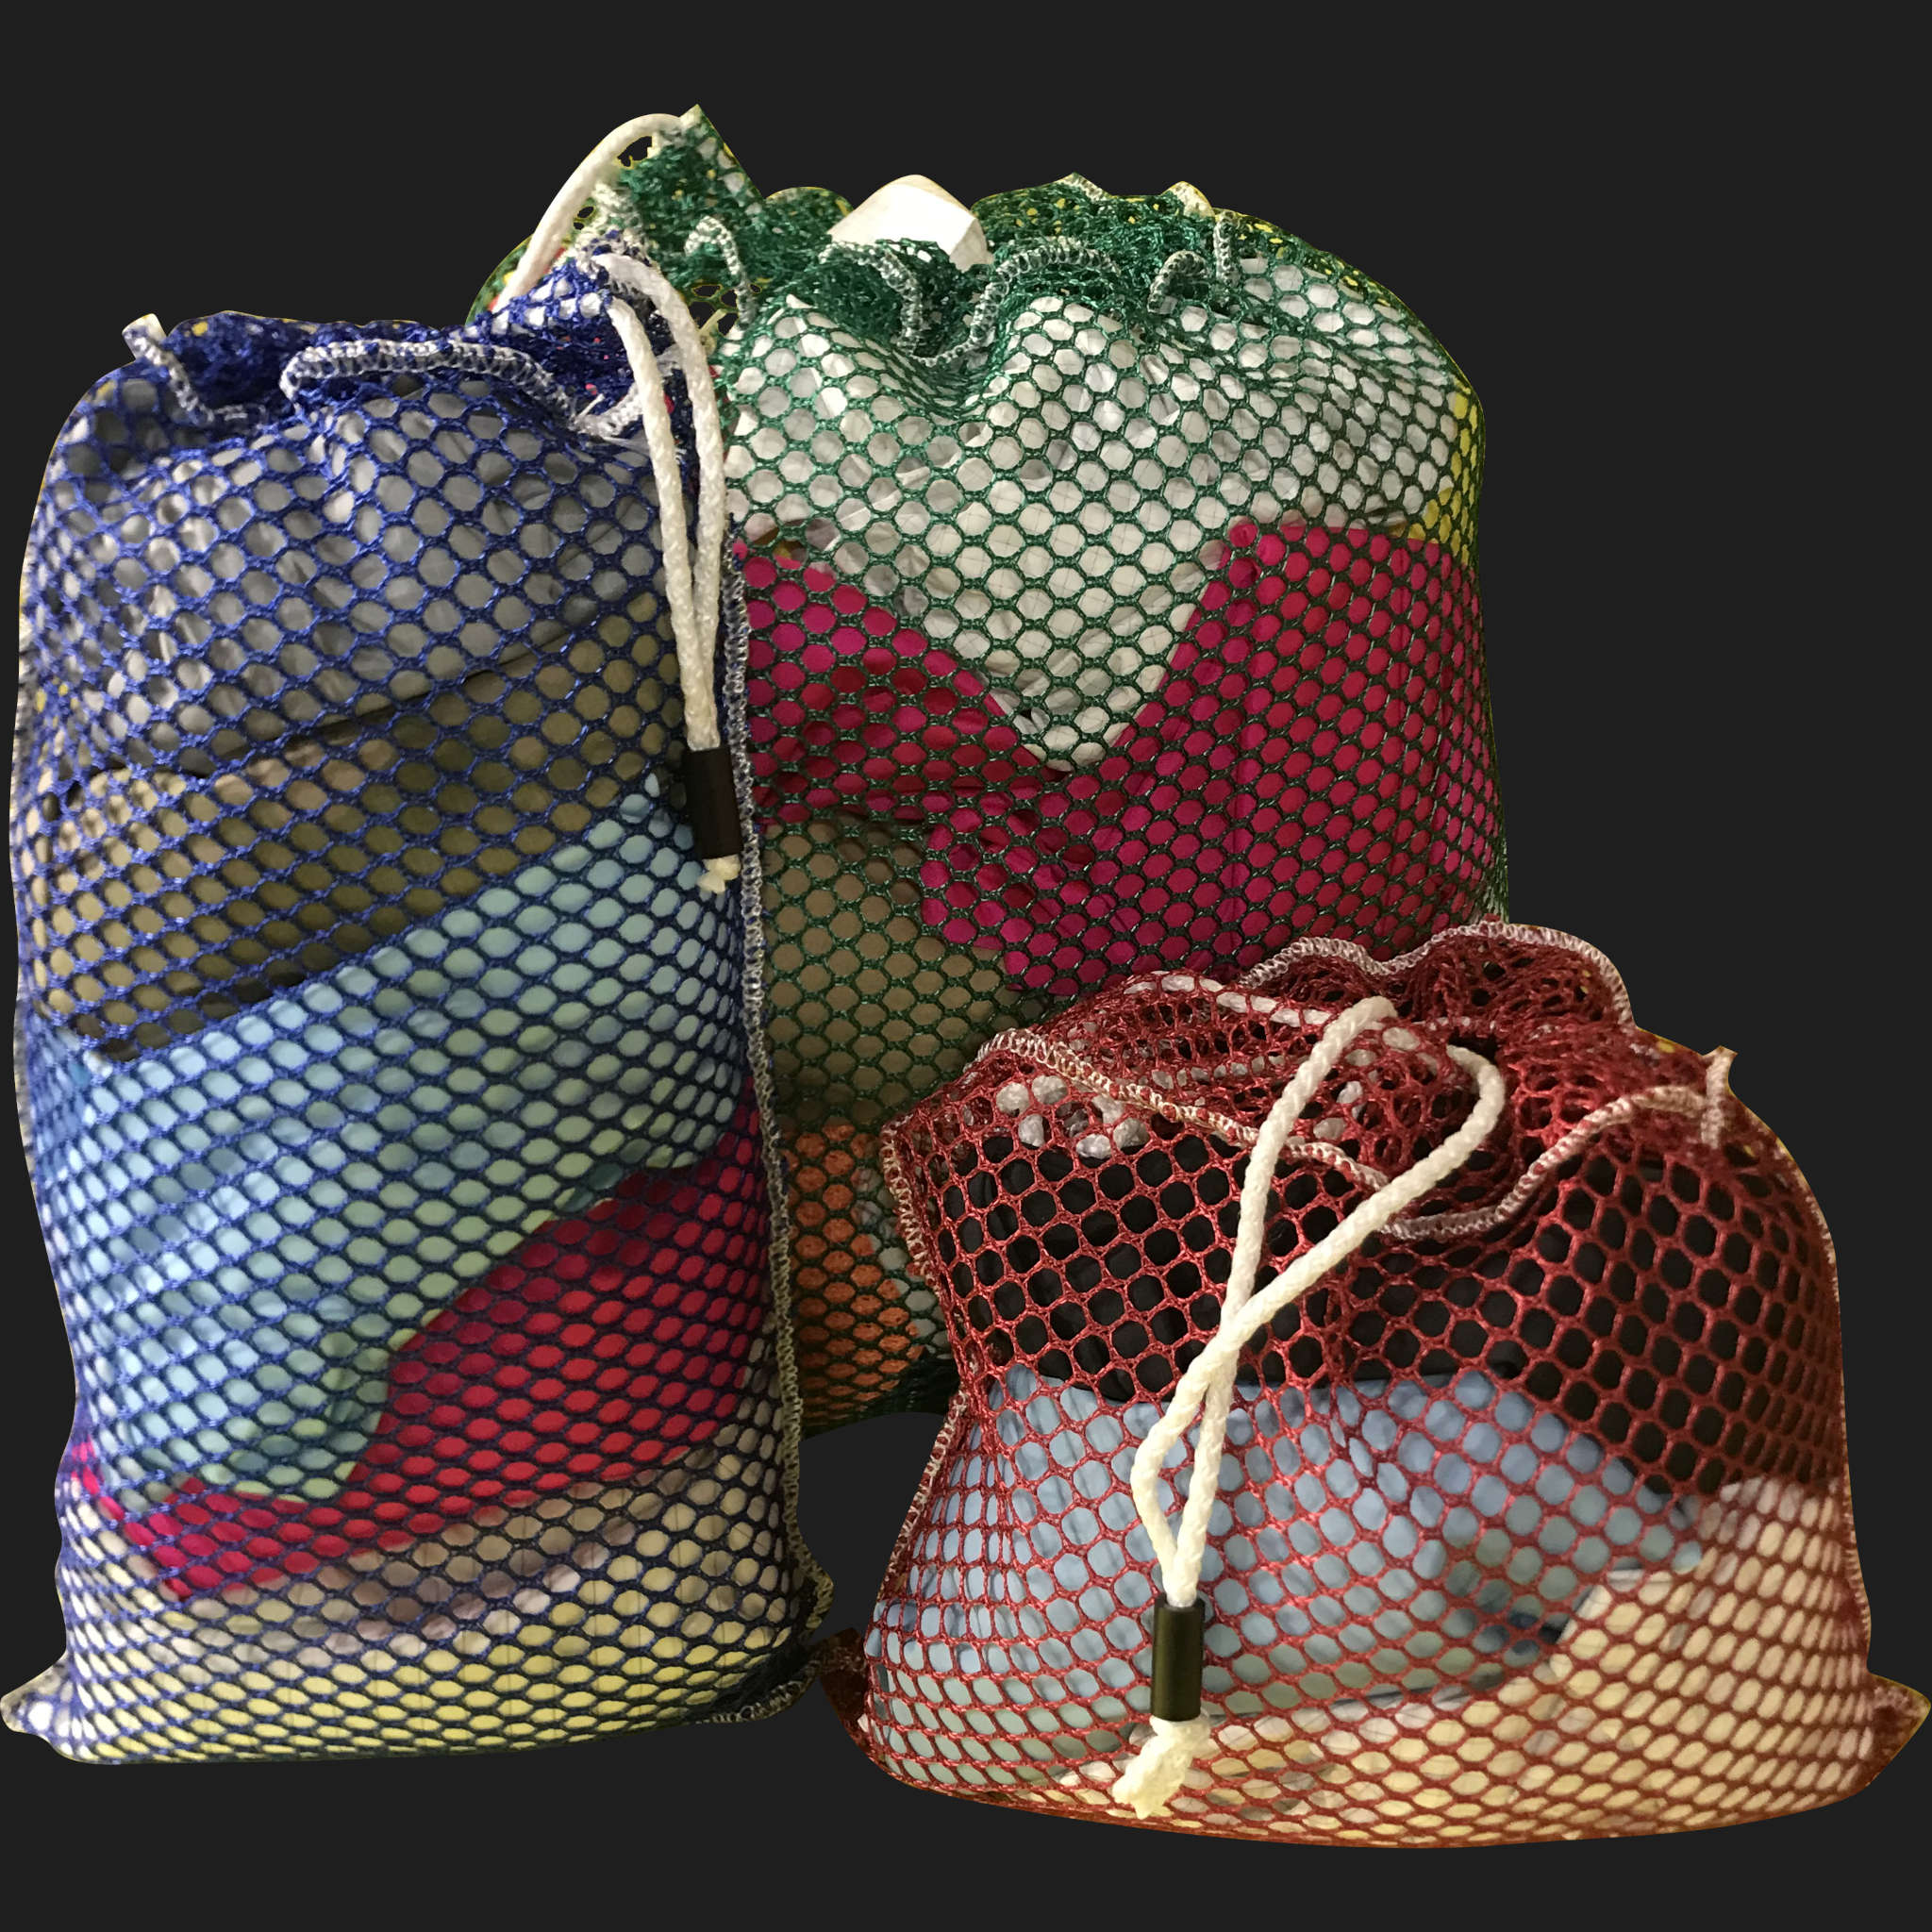 52" x 64" Customized Mesh-Net-Laundry Bags Heavy Duty with Cord and barrellock closure